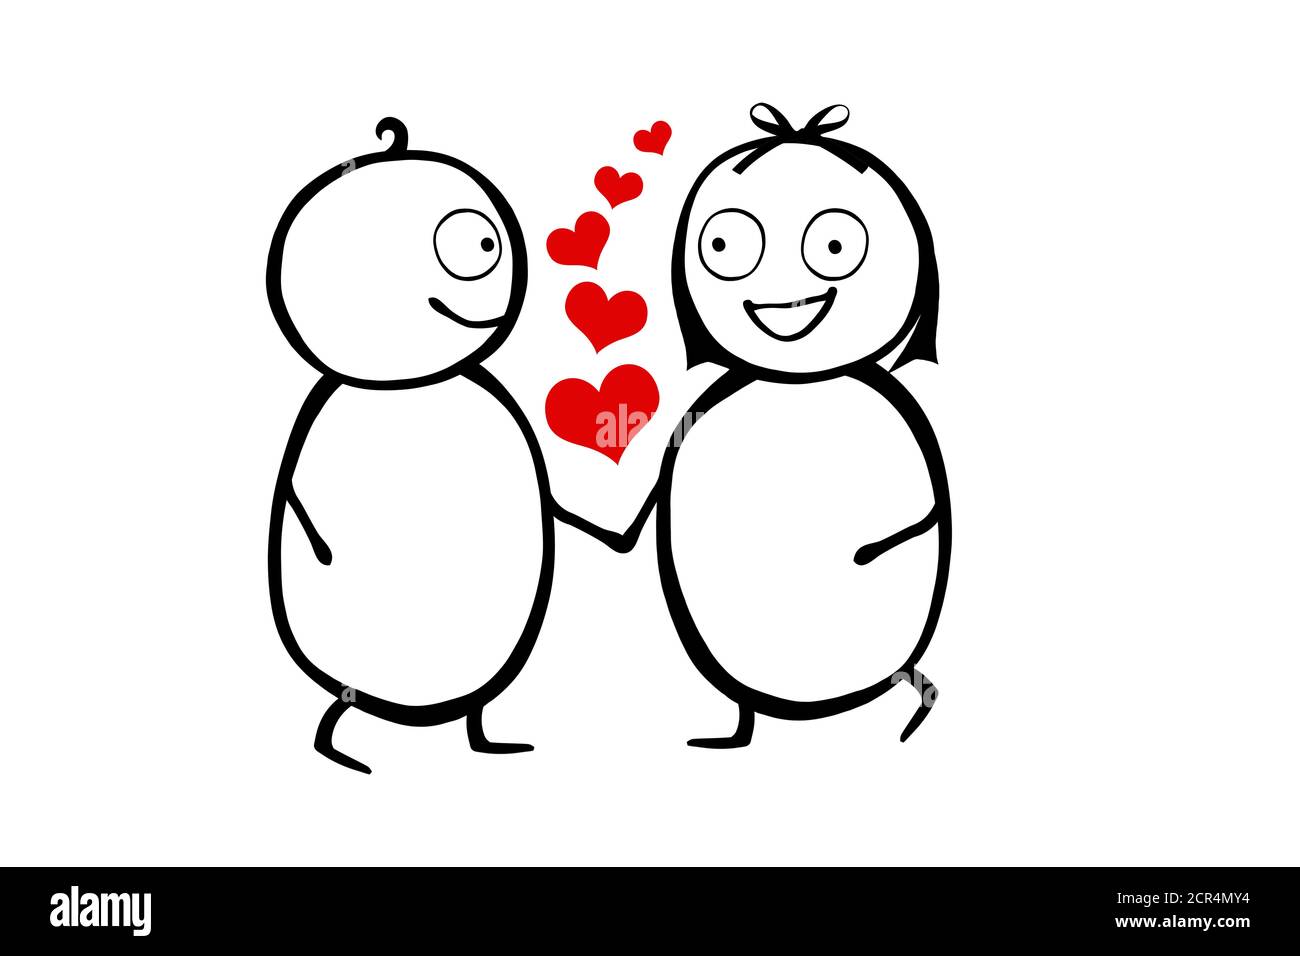 Illustration, stick figure, man and woman with little hearts Stock Photo